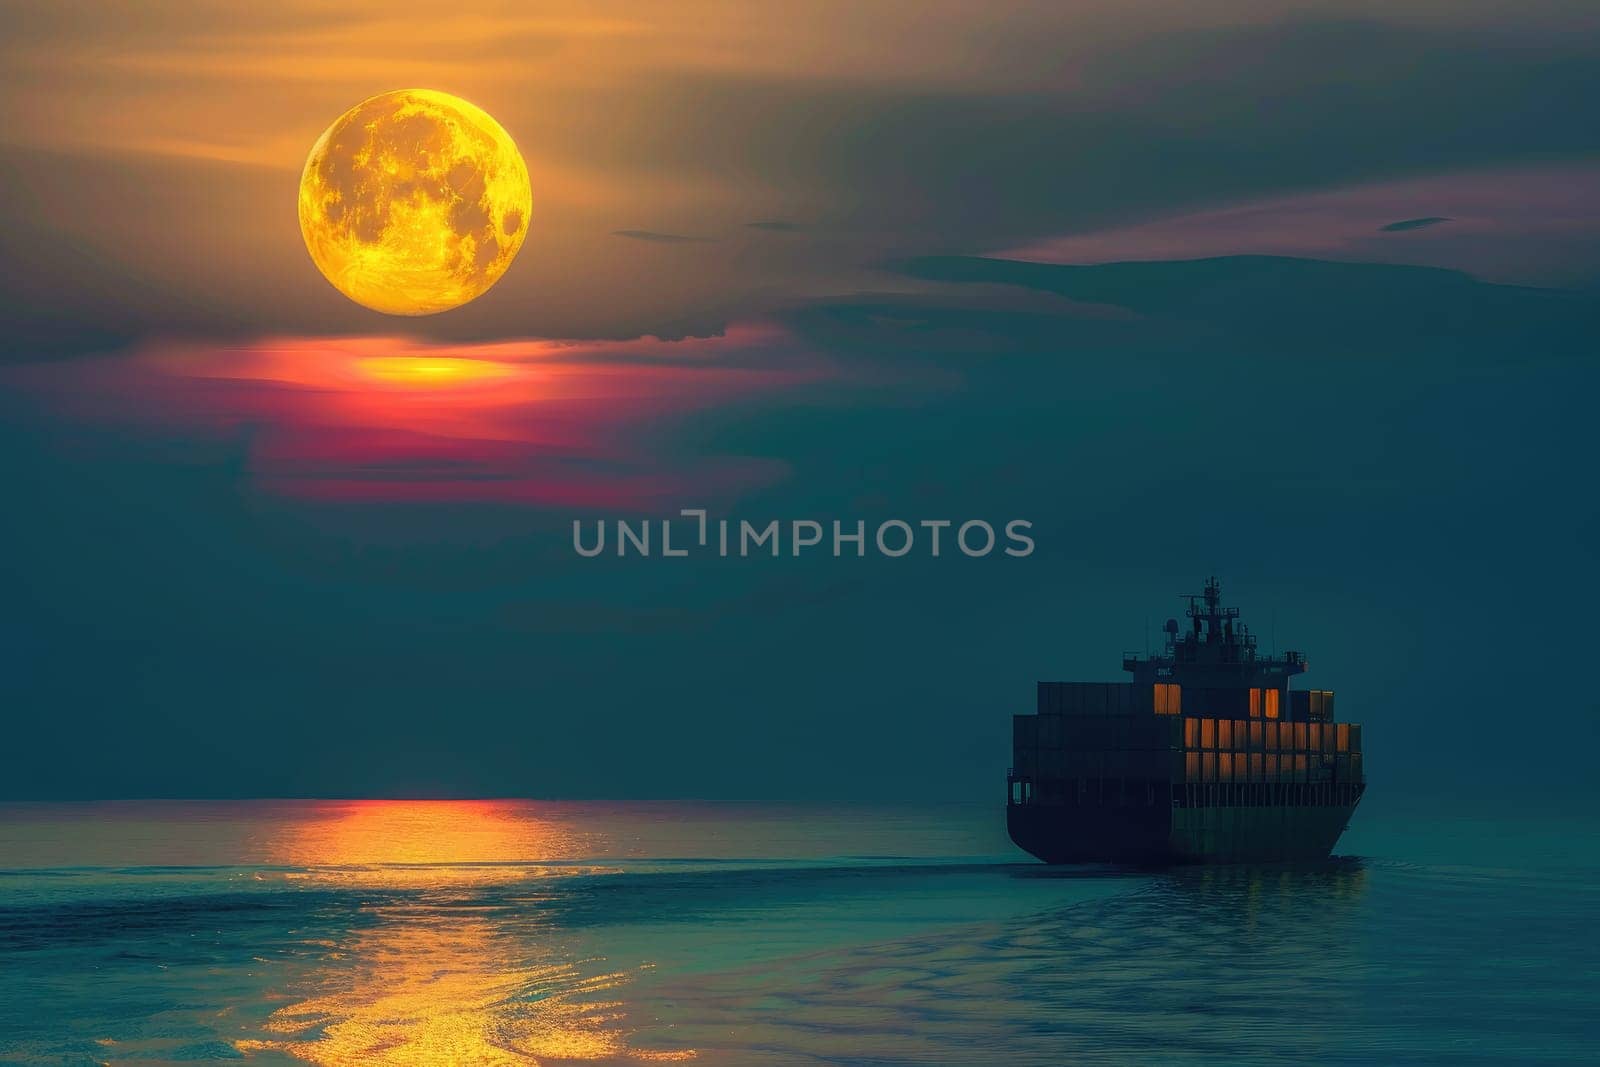 A dramatic silhouette of a cargo ship sailing across a calm ocean under a full moon. by Chawagen